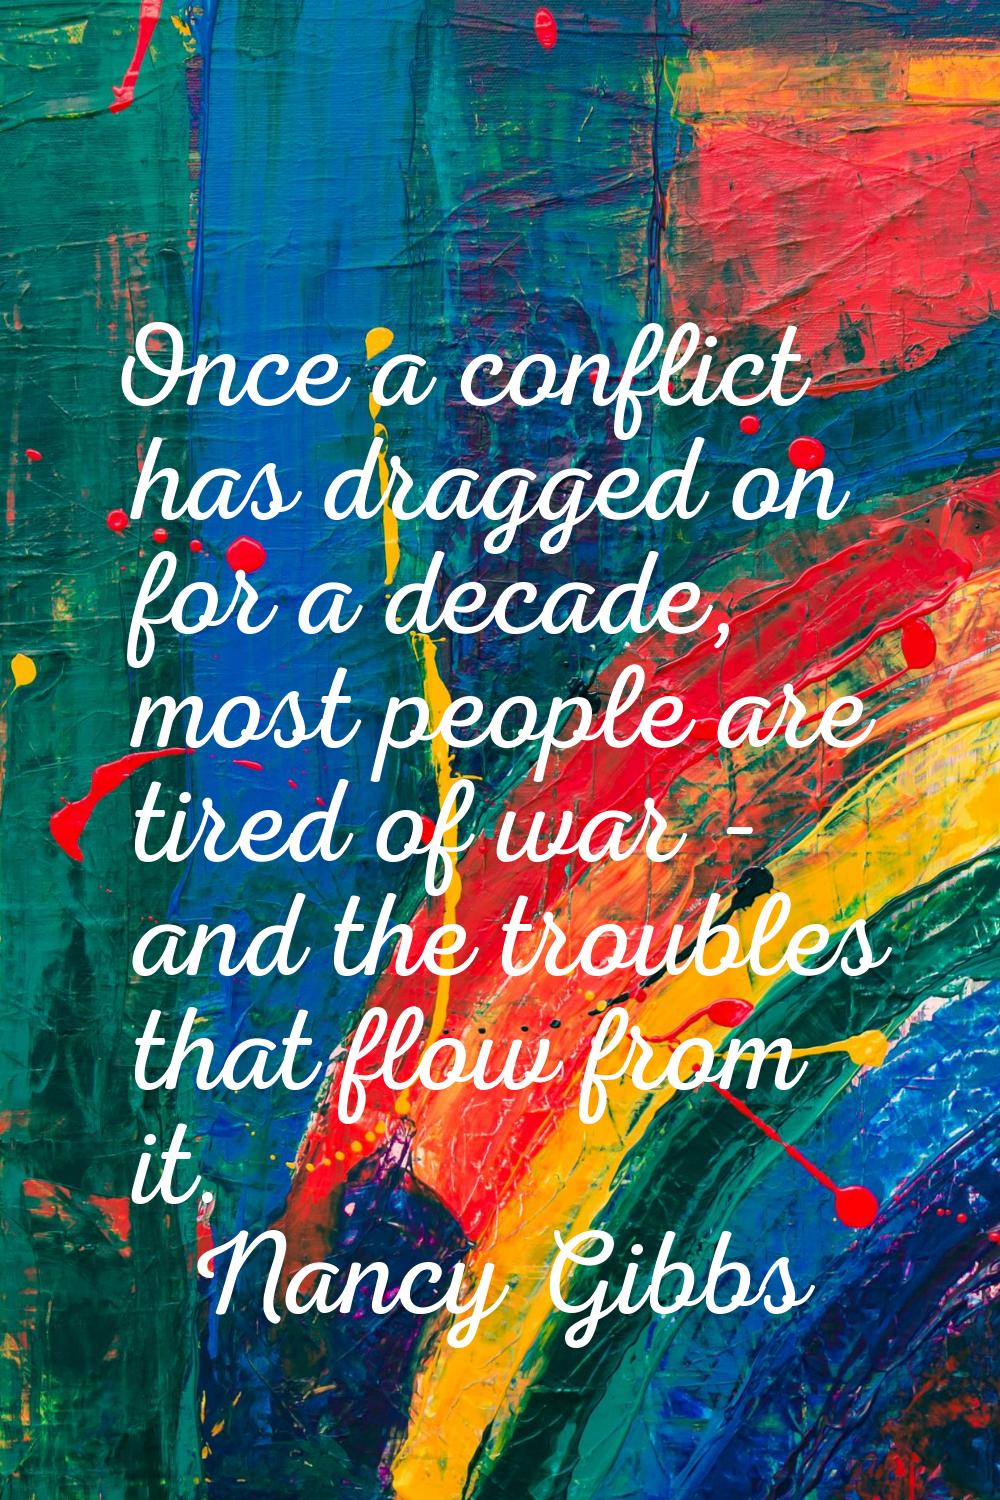 Once a conflict has dragged on for a decade, most people are tired of war - and the troubles that f